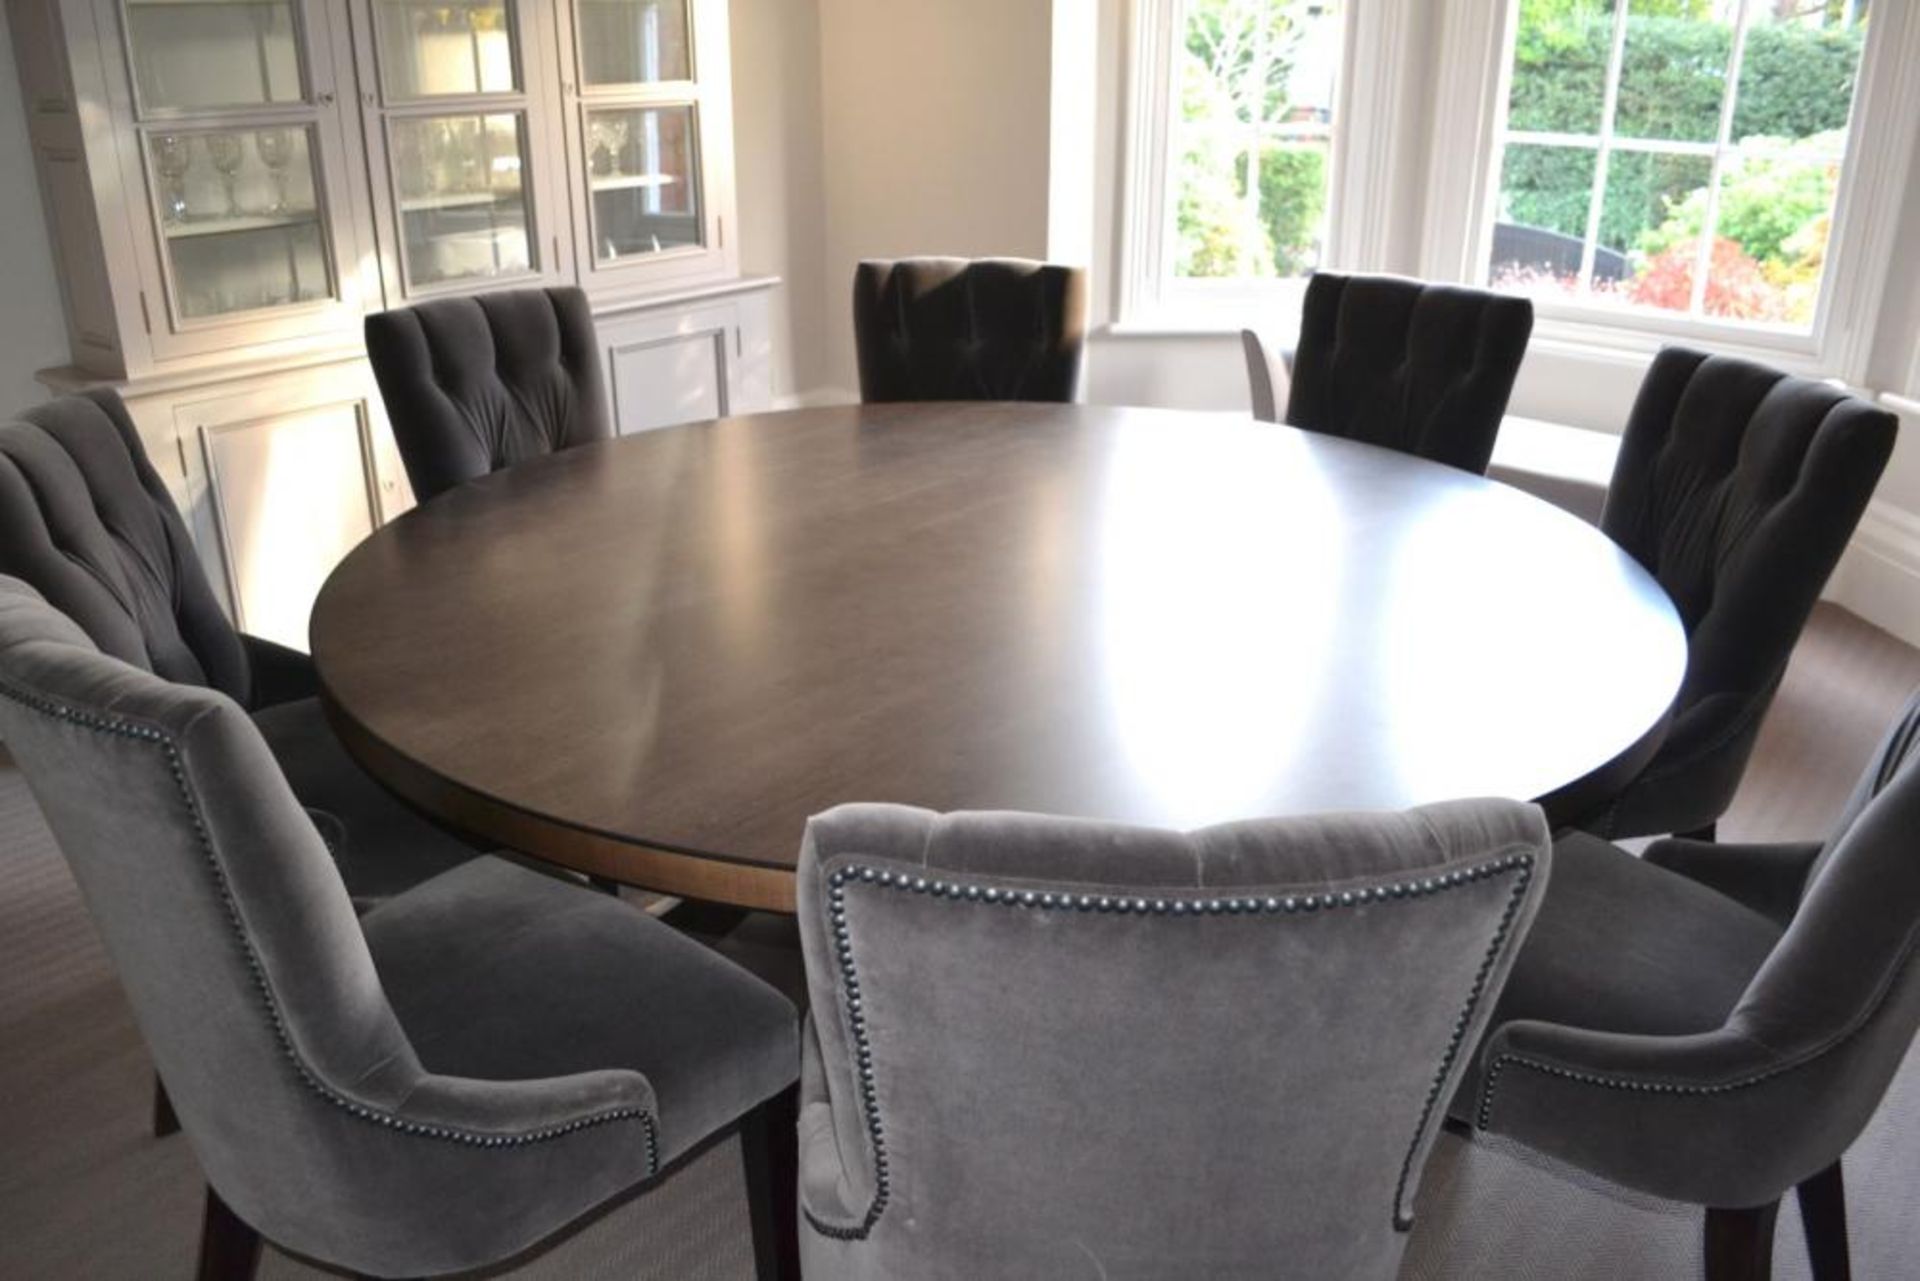 1 x Bespoke Round Dining Table With Sycamore Wood Finish - Includes Set of Six Grey Button Back - Image 4 of 20